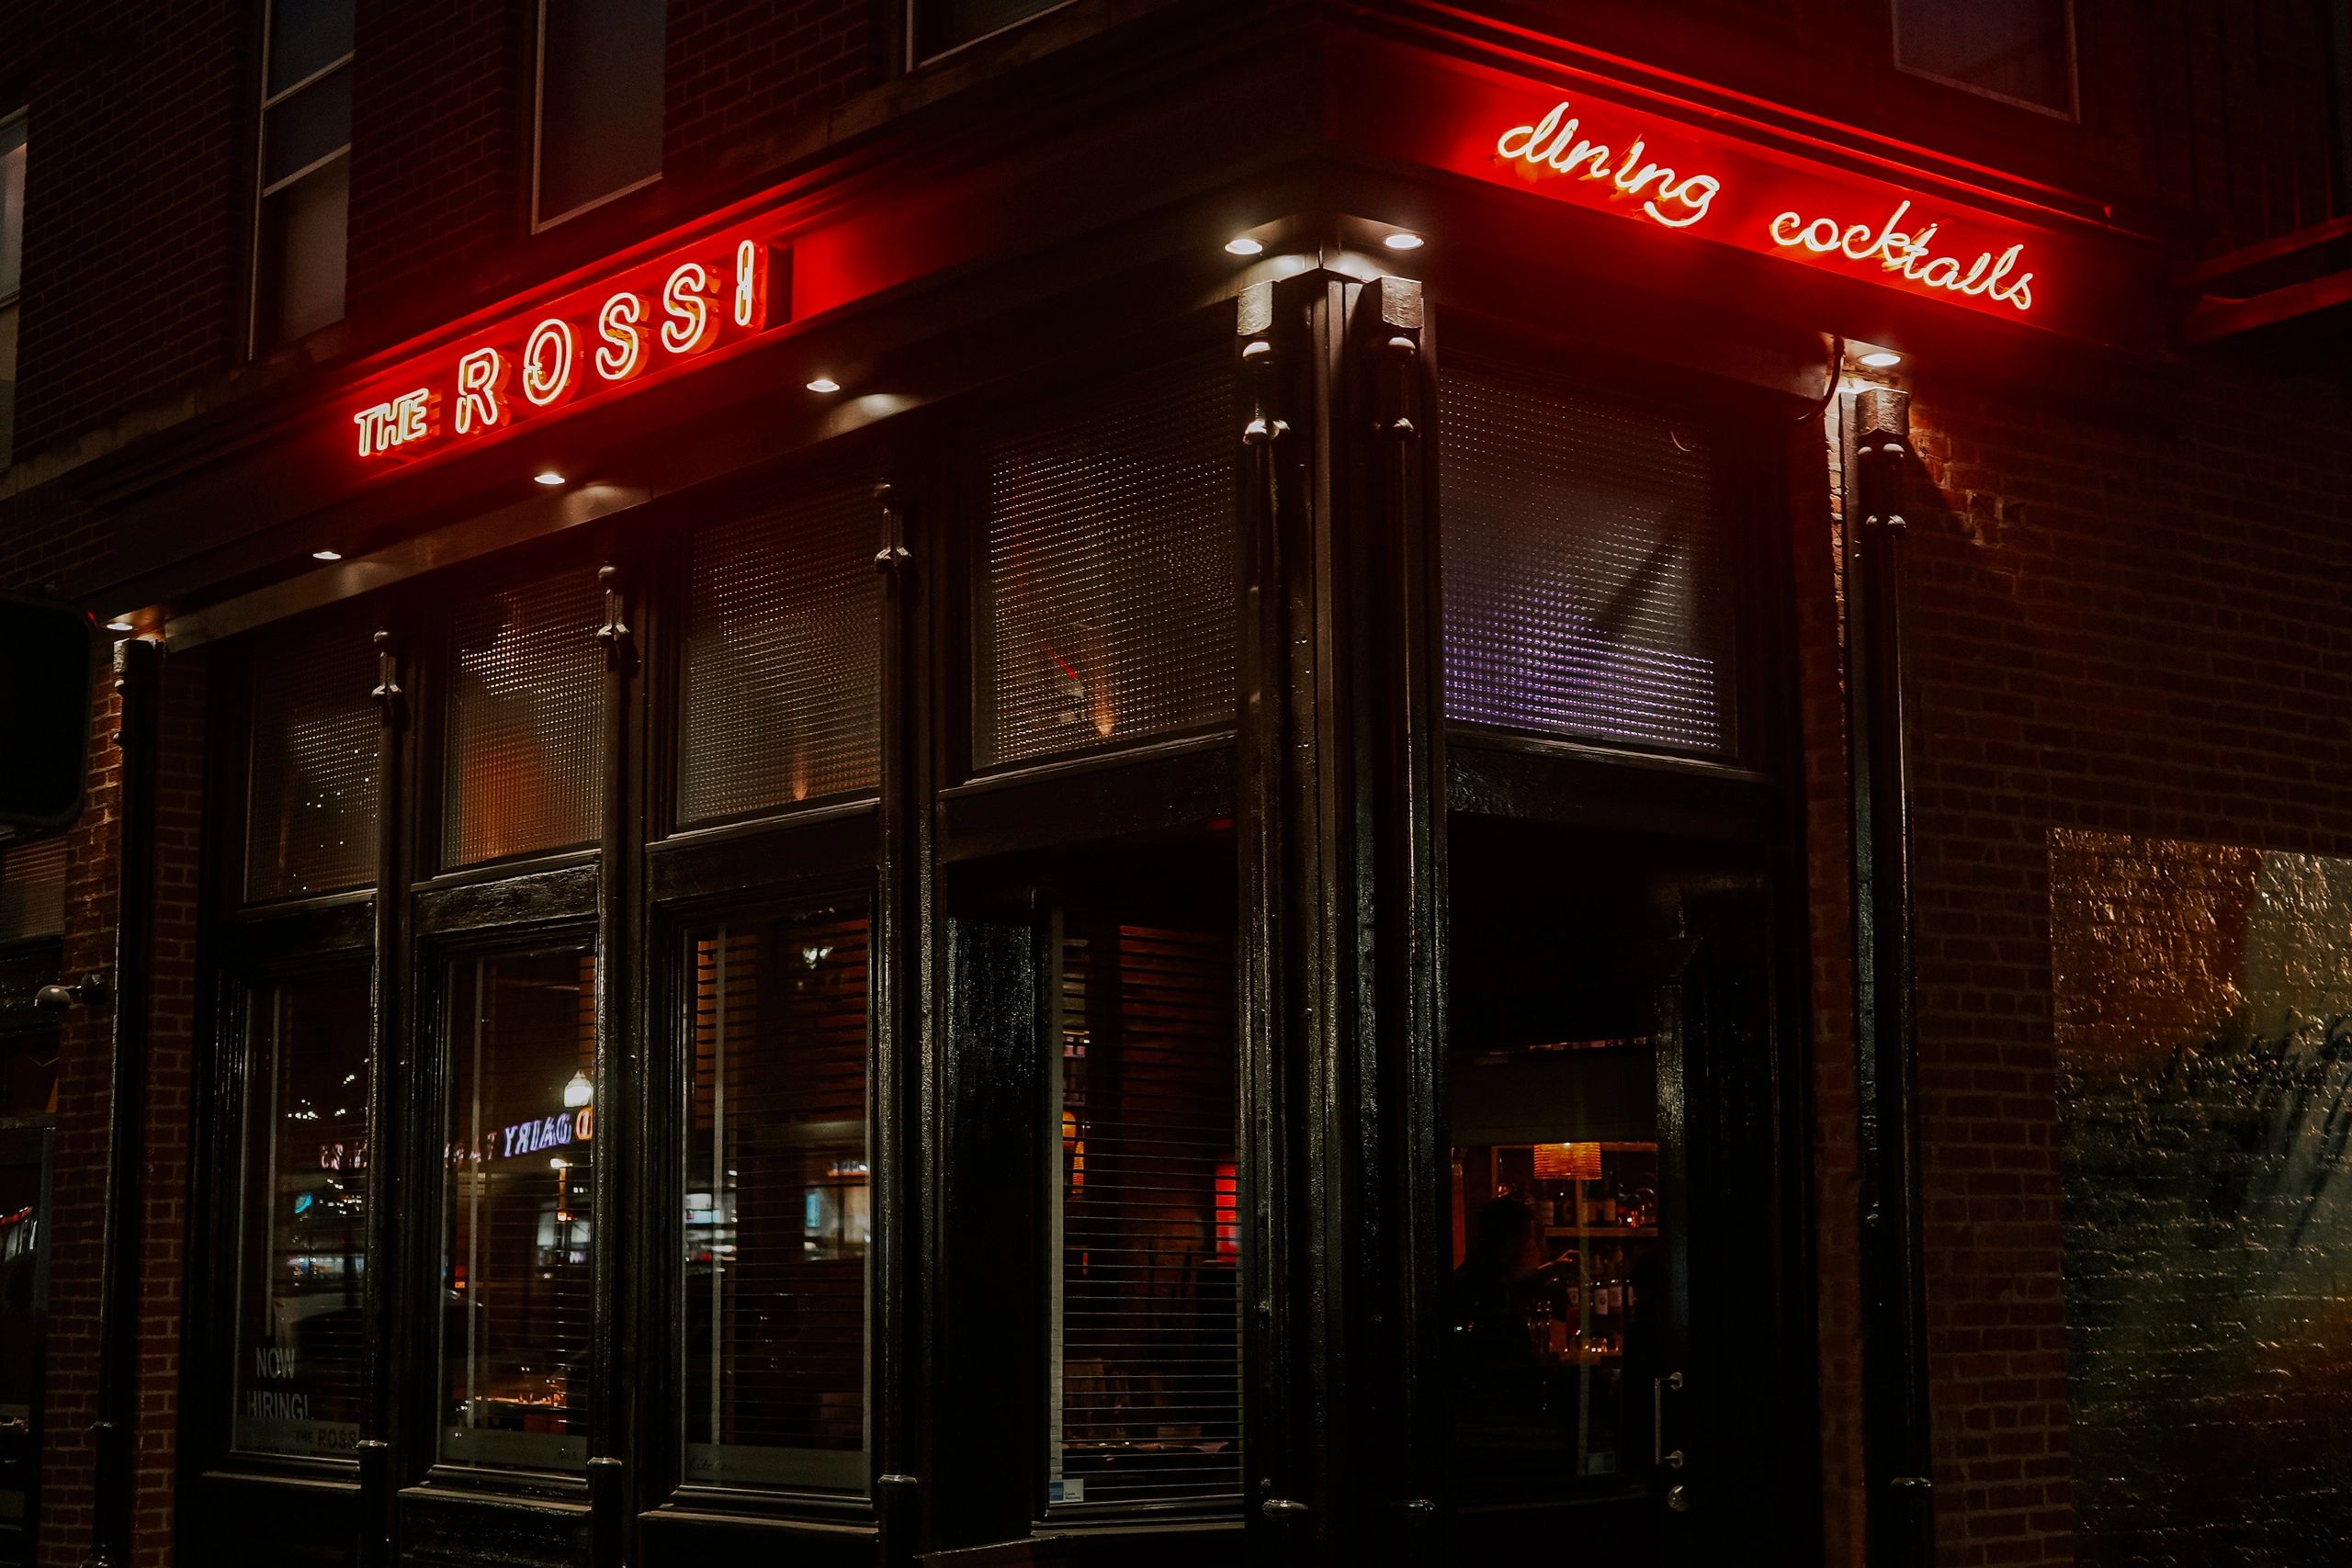 the rossi kitchen and bar